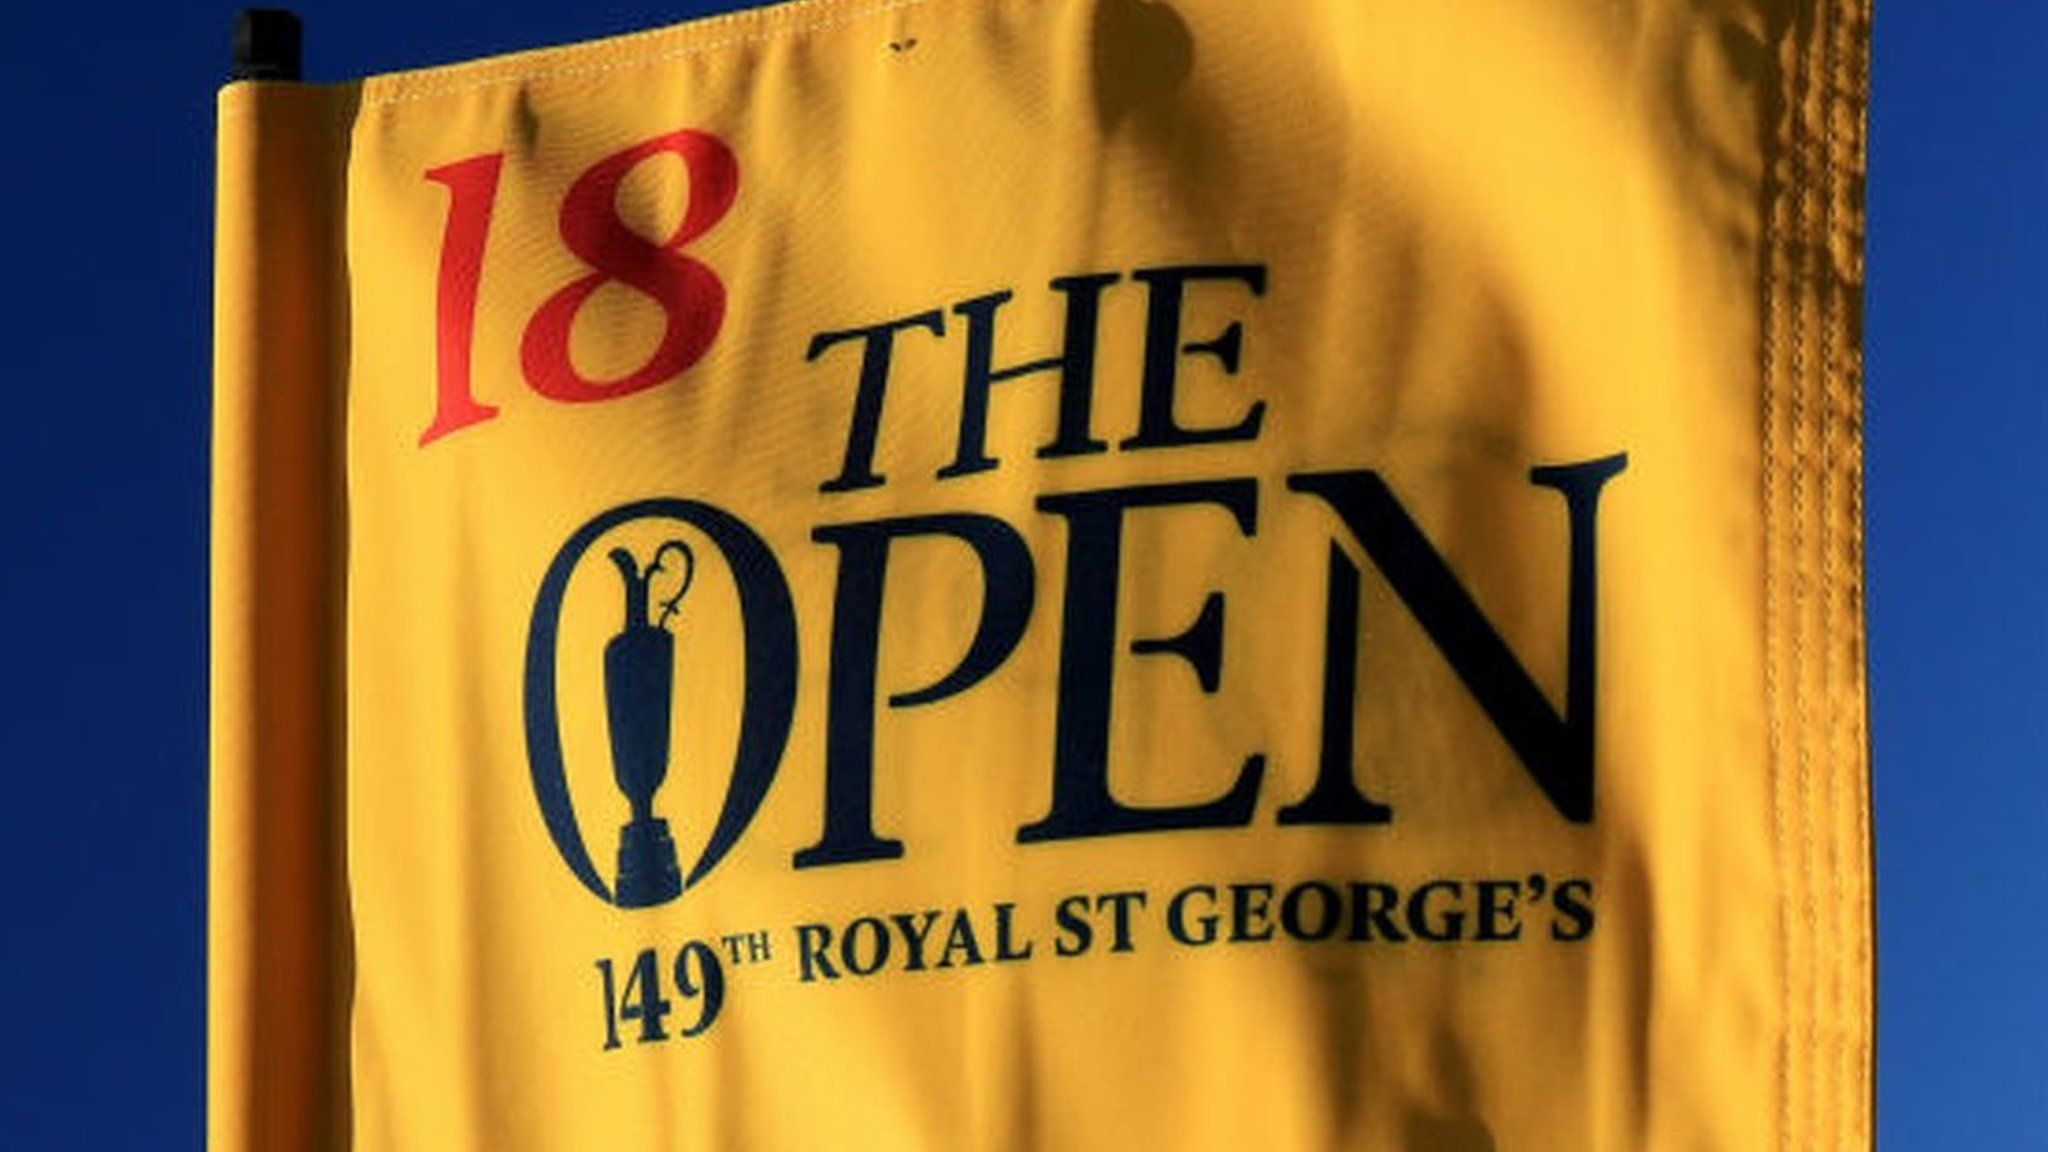 The Open logo on a flag